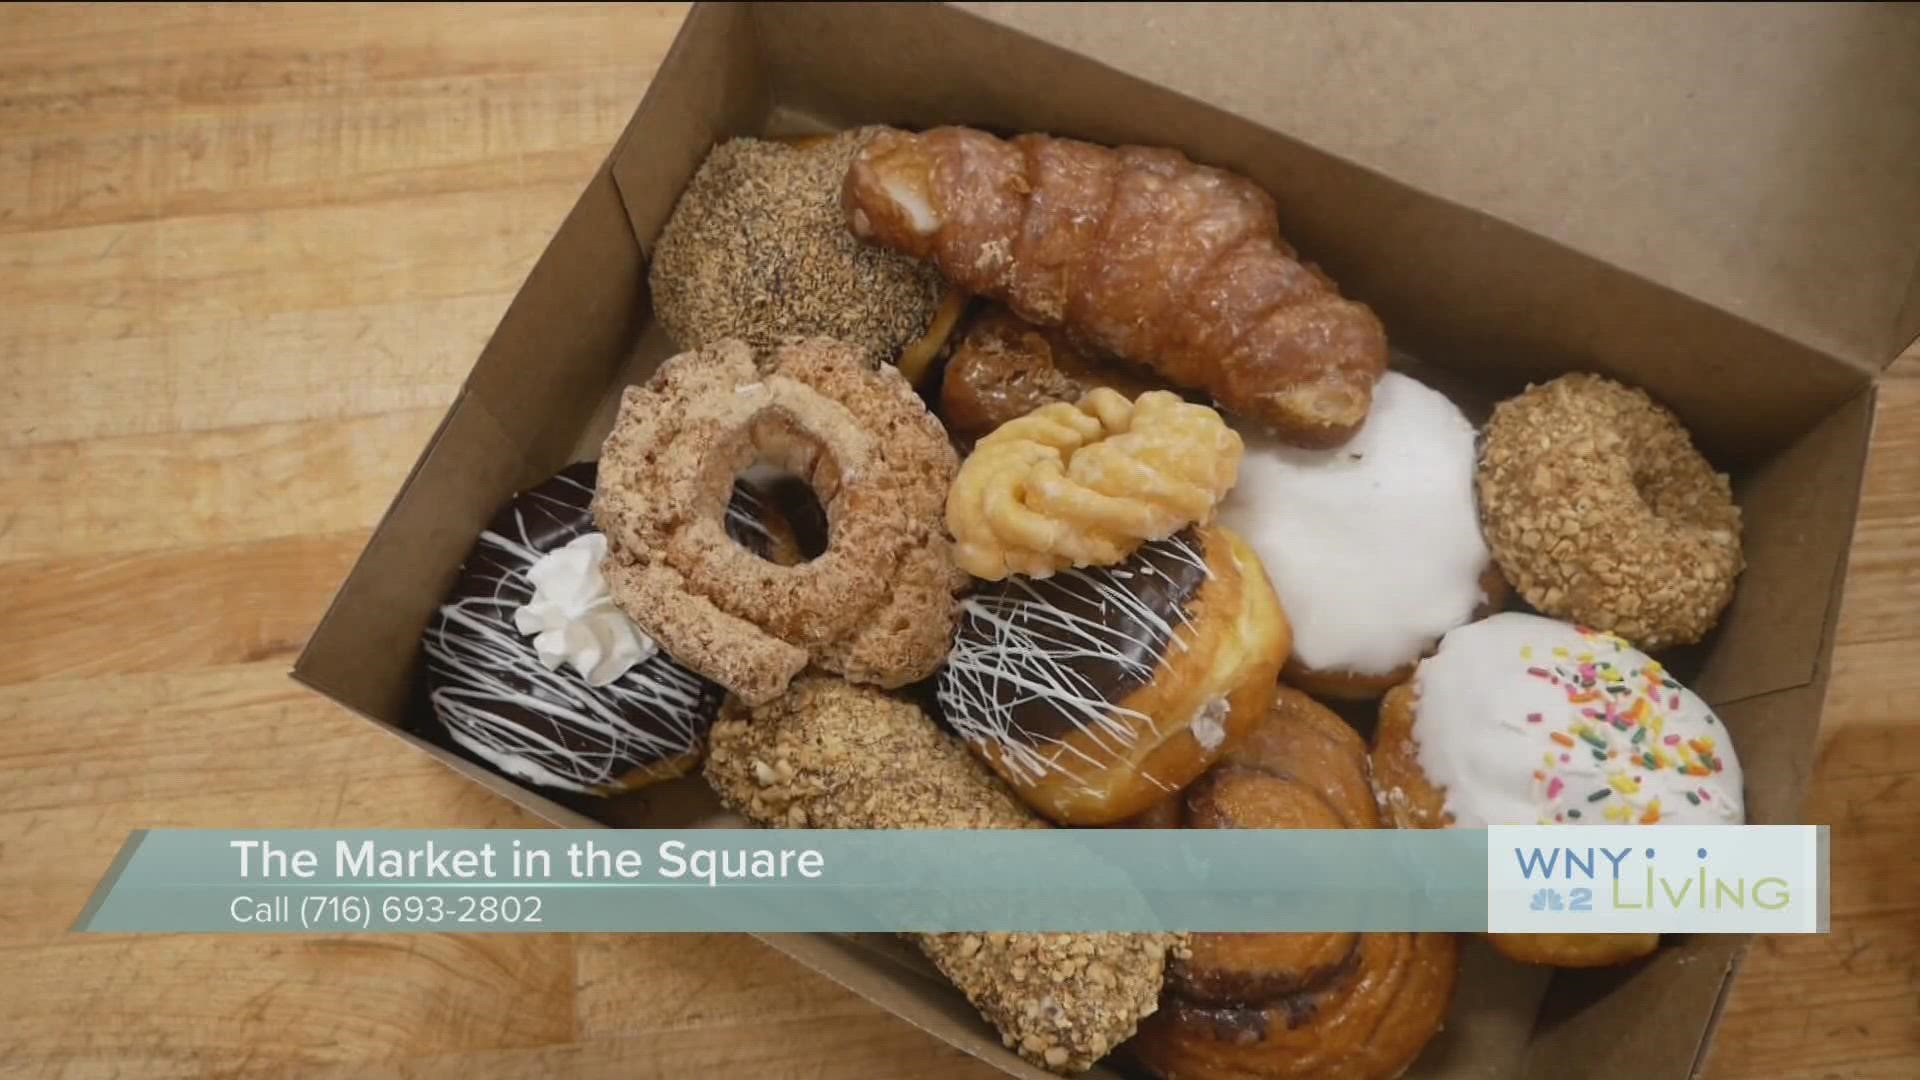 WNY Living - October 19 - The Market in the Square (THIS VIDEO IS SPONSORED BY THE MARKET IN THE SQUARE)